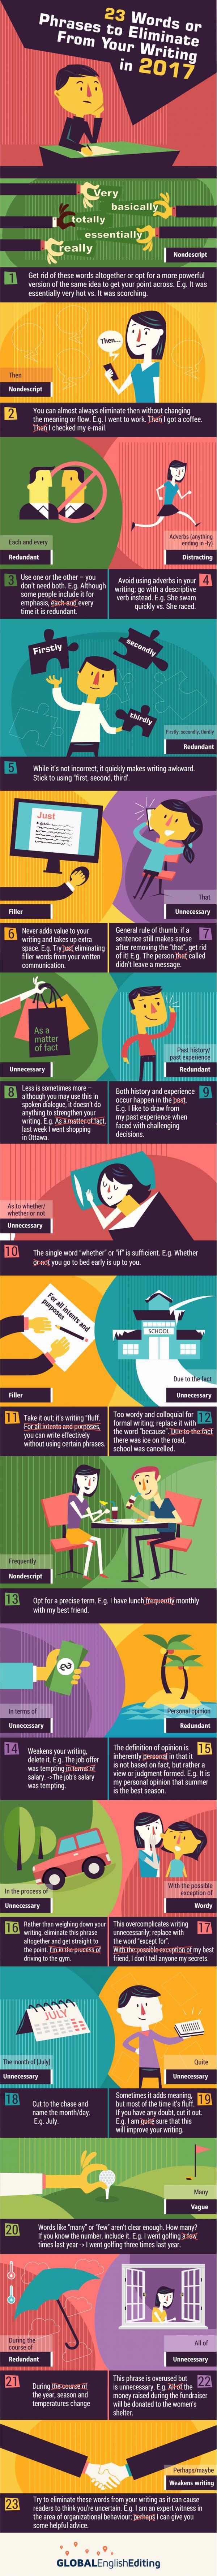 23 Words or Phrases to Eliminate From Your Writing Infographic